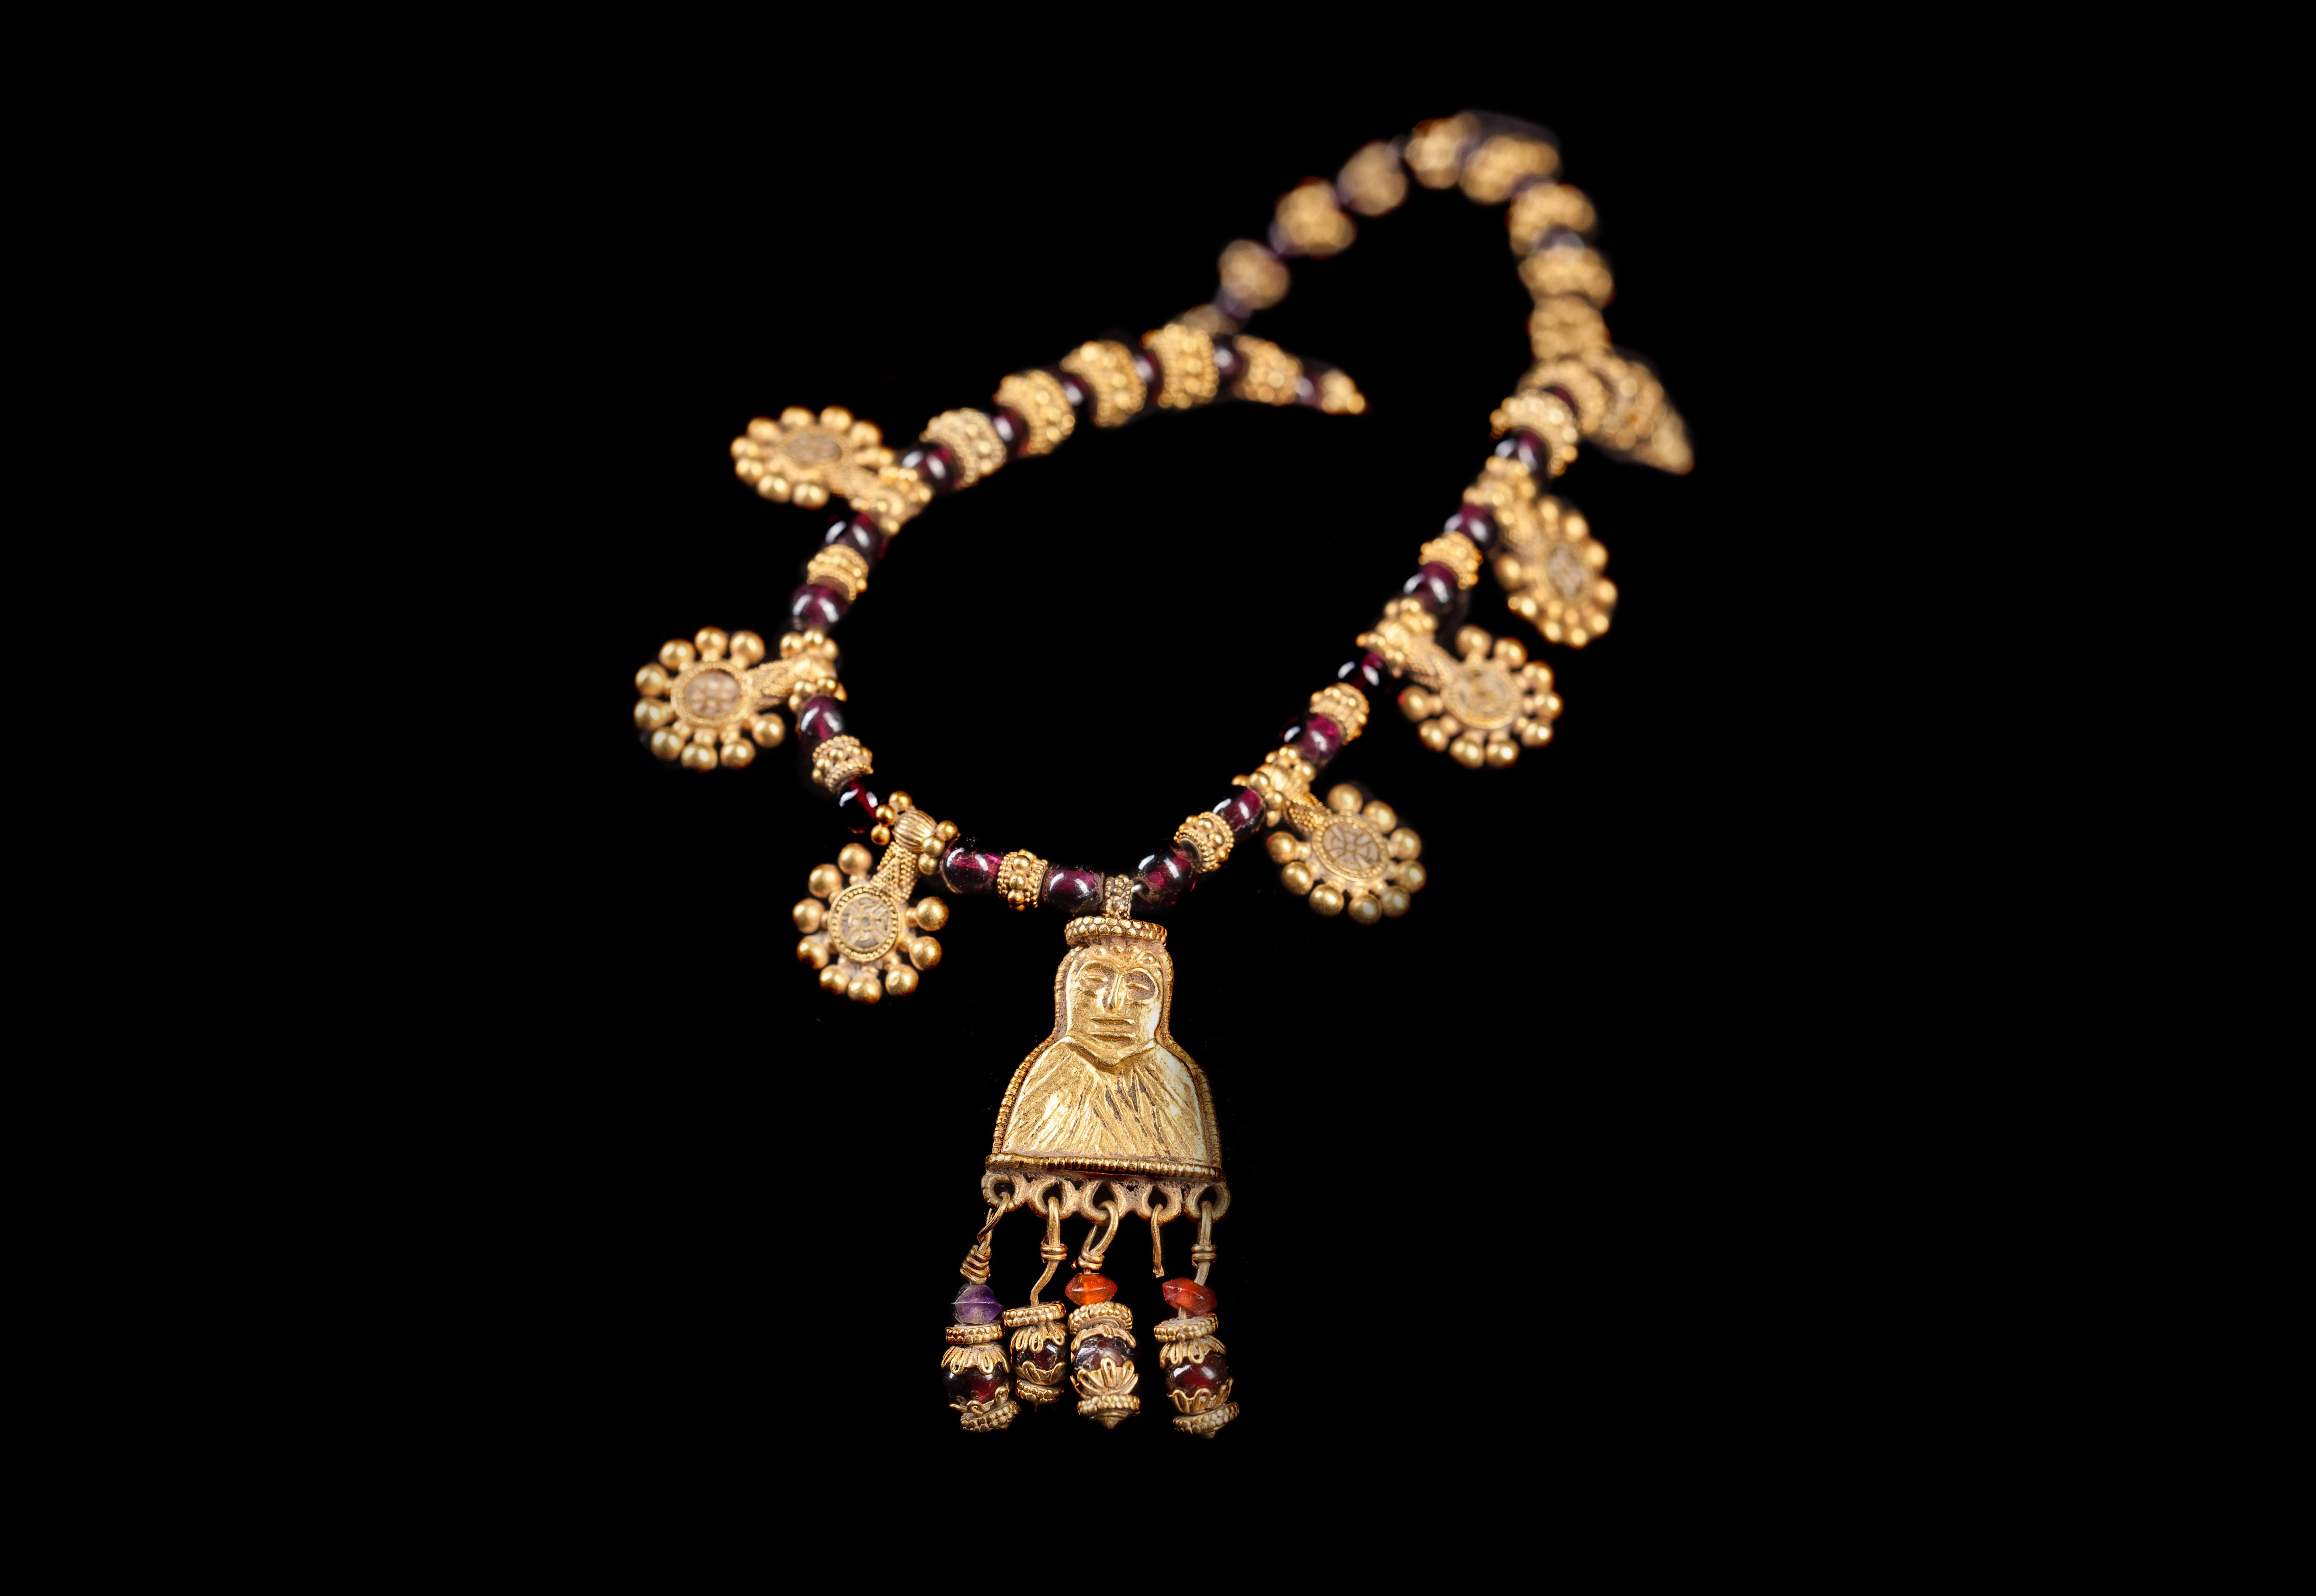 An ancient Hellenistic period necklace from, 3rd-1st Century B.C., South Arabia, possinly Yemen. This remarkable necklace is composed of spherical garnet beads, interspersed alternately with gold, granulated spacer beads. At the centre hangs a